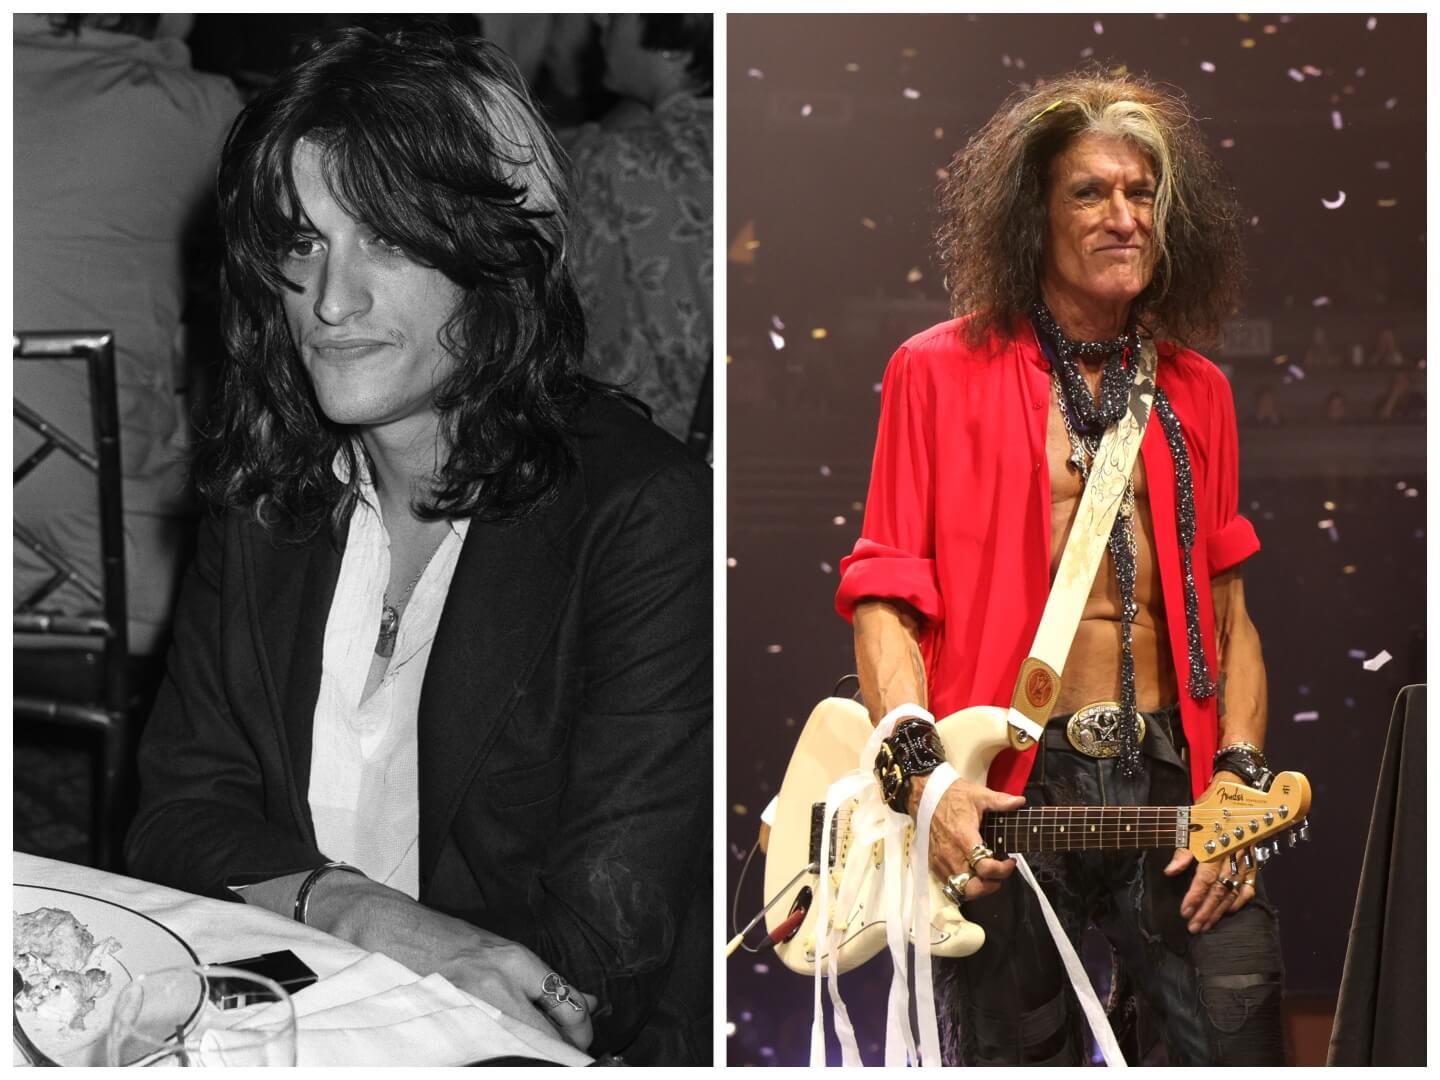 A black and white picture of Joe Perry sitting at a table in 1978. Joe Perry wears an open red shirt and stands with a guitar in 2023.